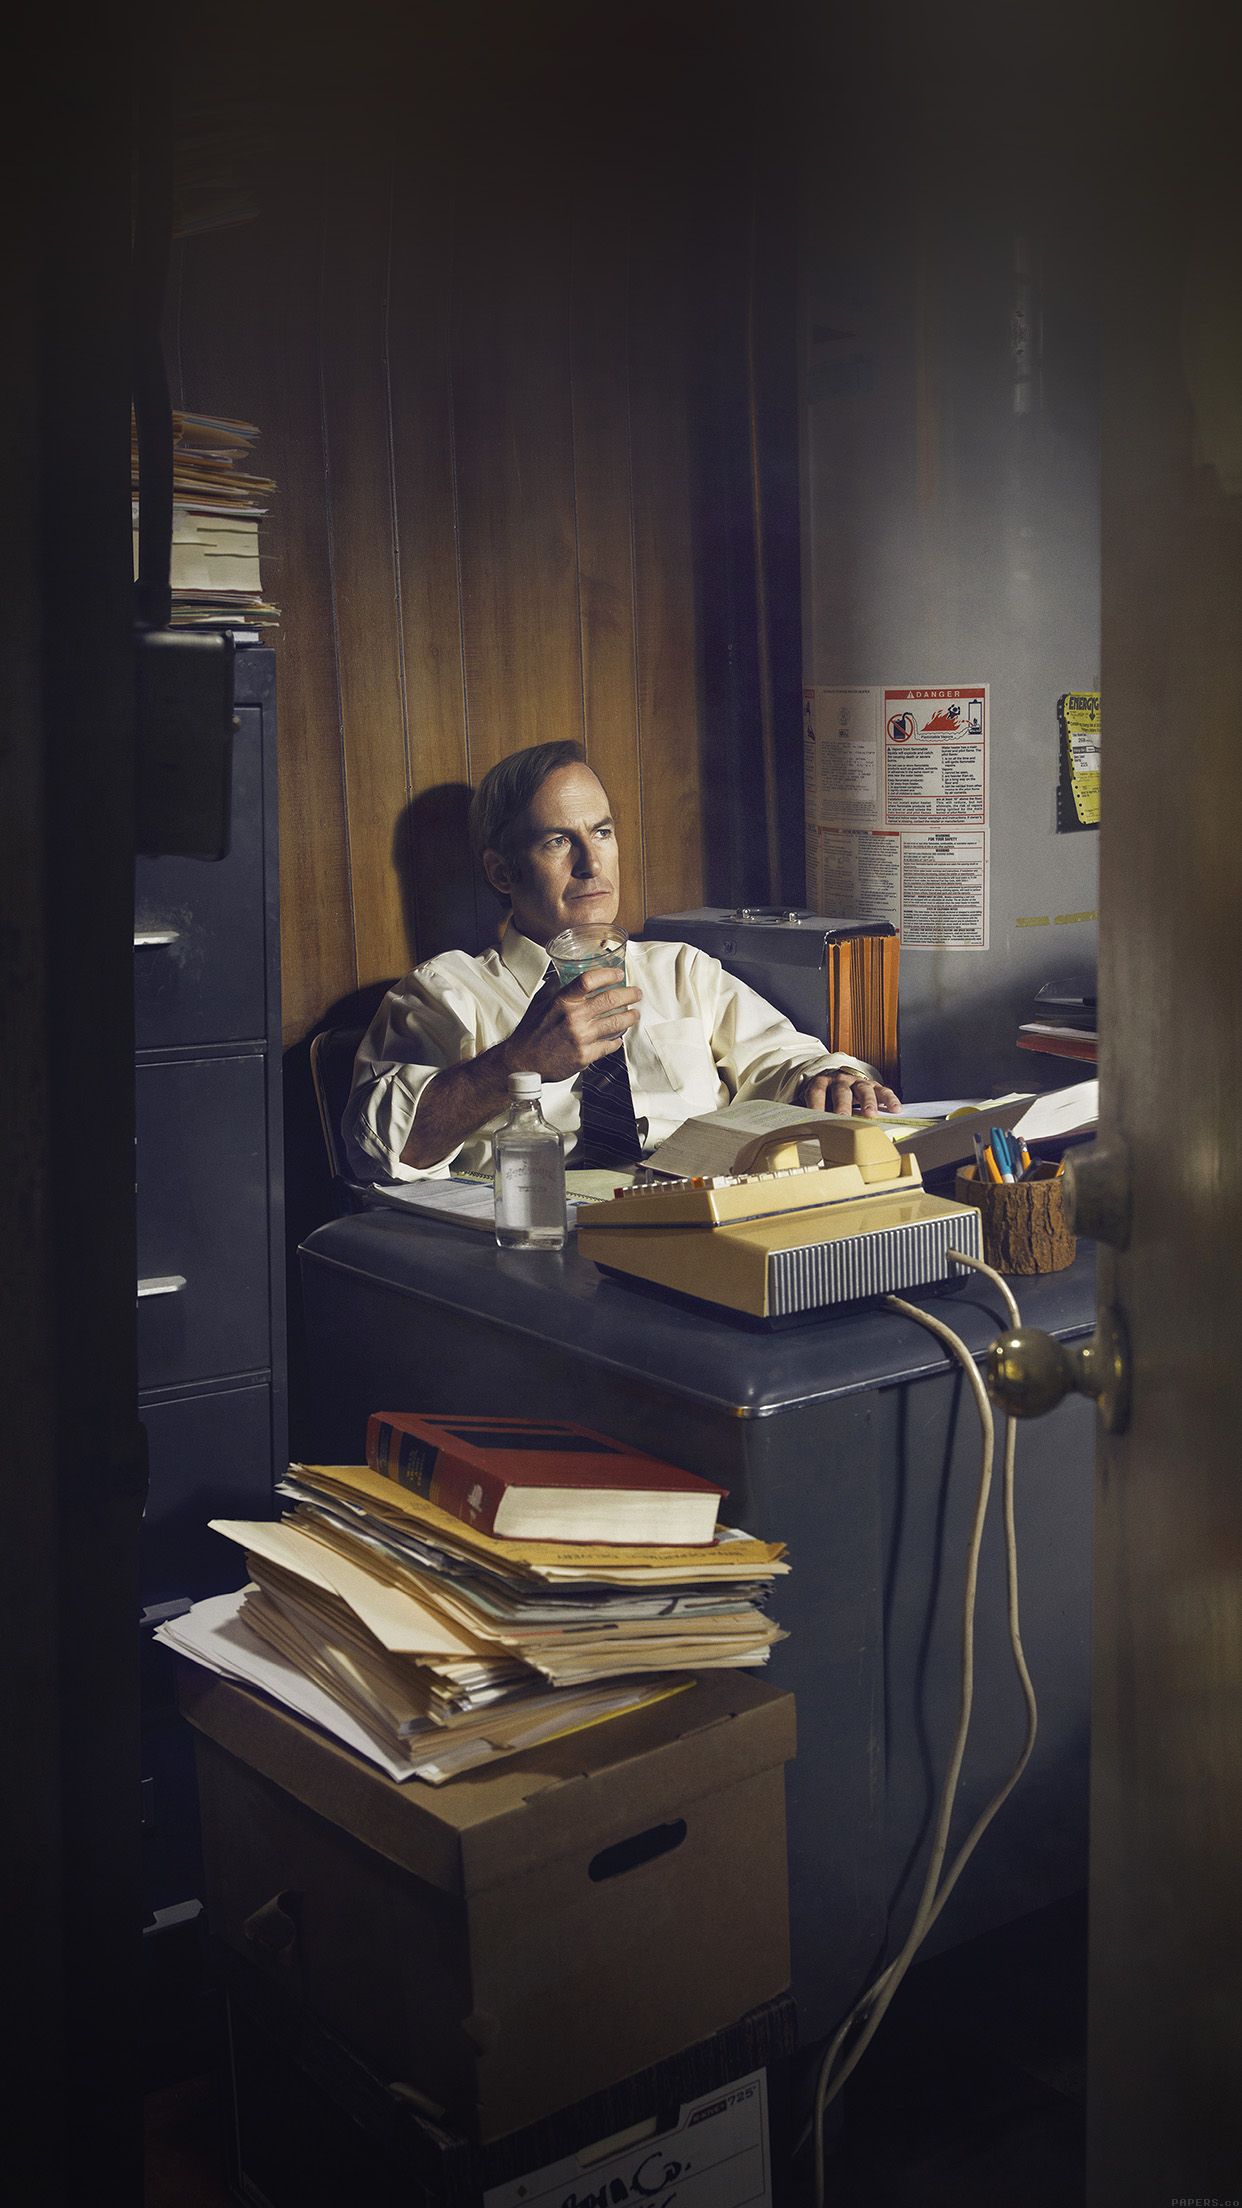 Better Call Saul Film Drama Android wallpaper